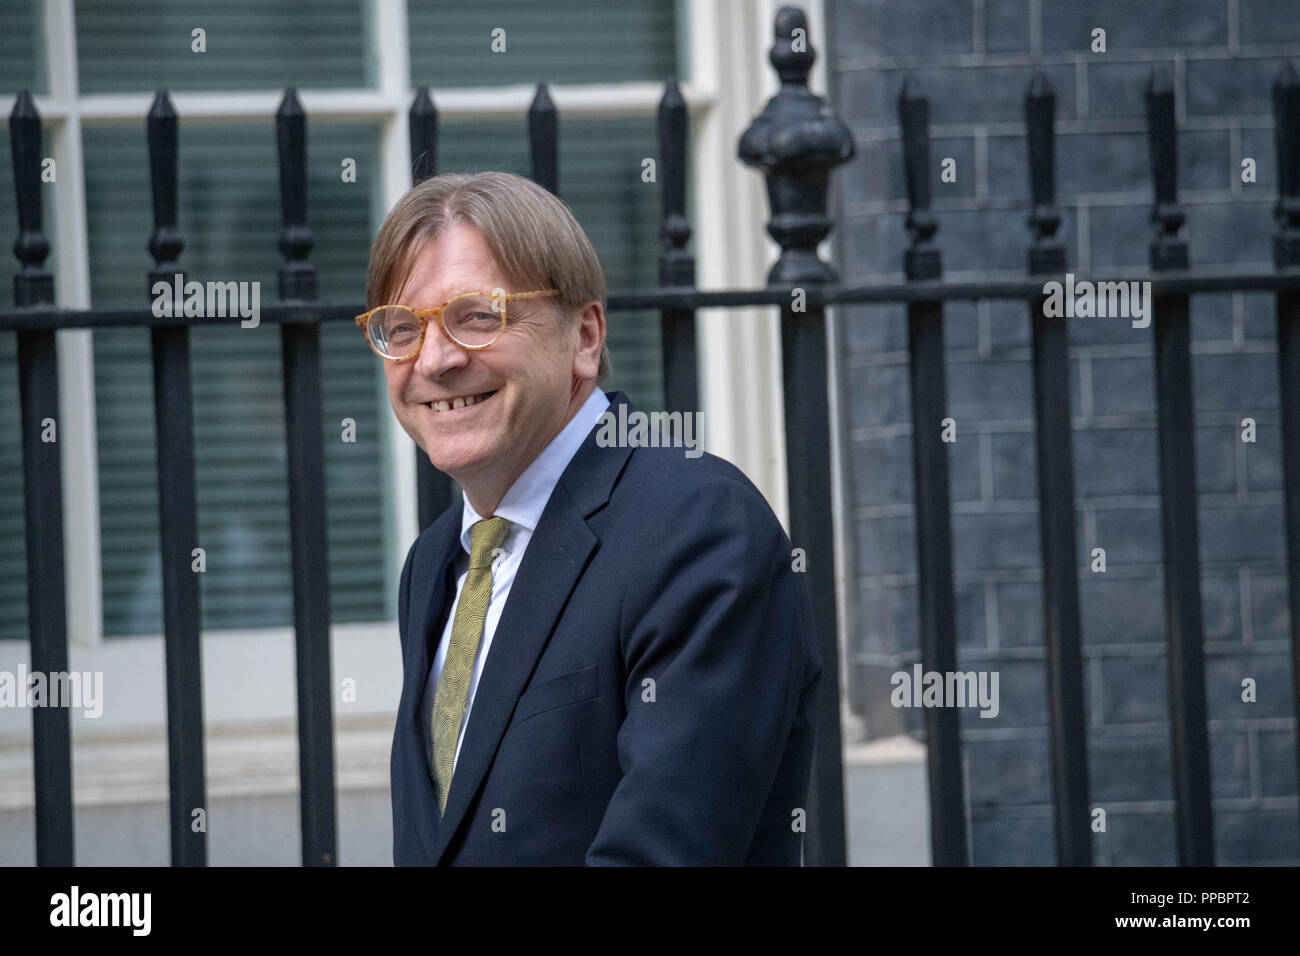 London 24th September 2018, Guy Verhofstadt Leader of the Alliance of Liberals and  Democrats in for Europe in the EU arrives at 10 Downing Street for a meeting with the Prime Minister  Credit Ian Davidson/Alamy Live News Stock Photo